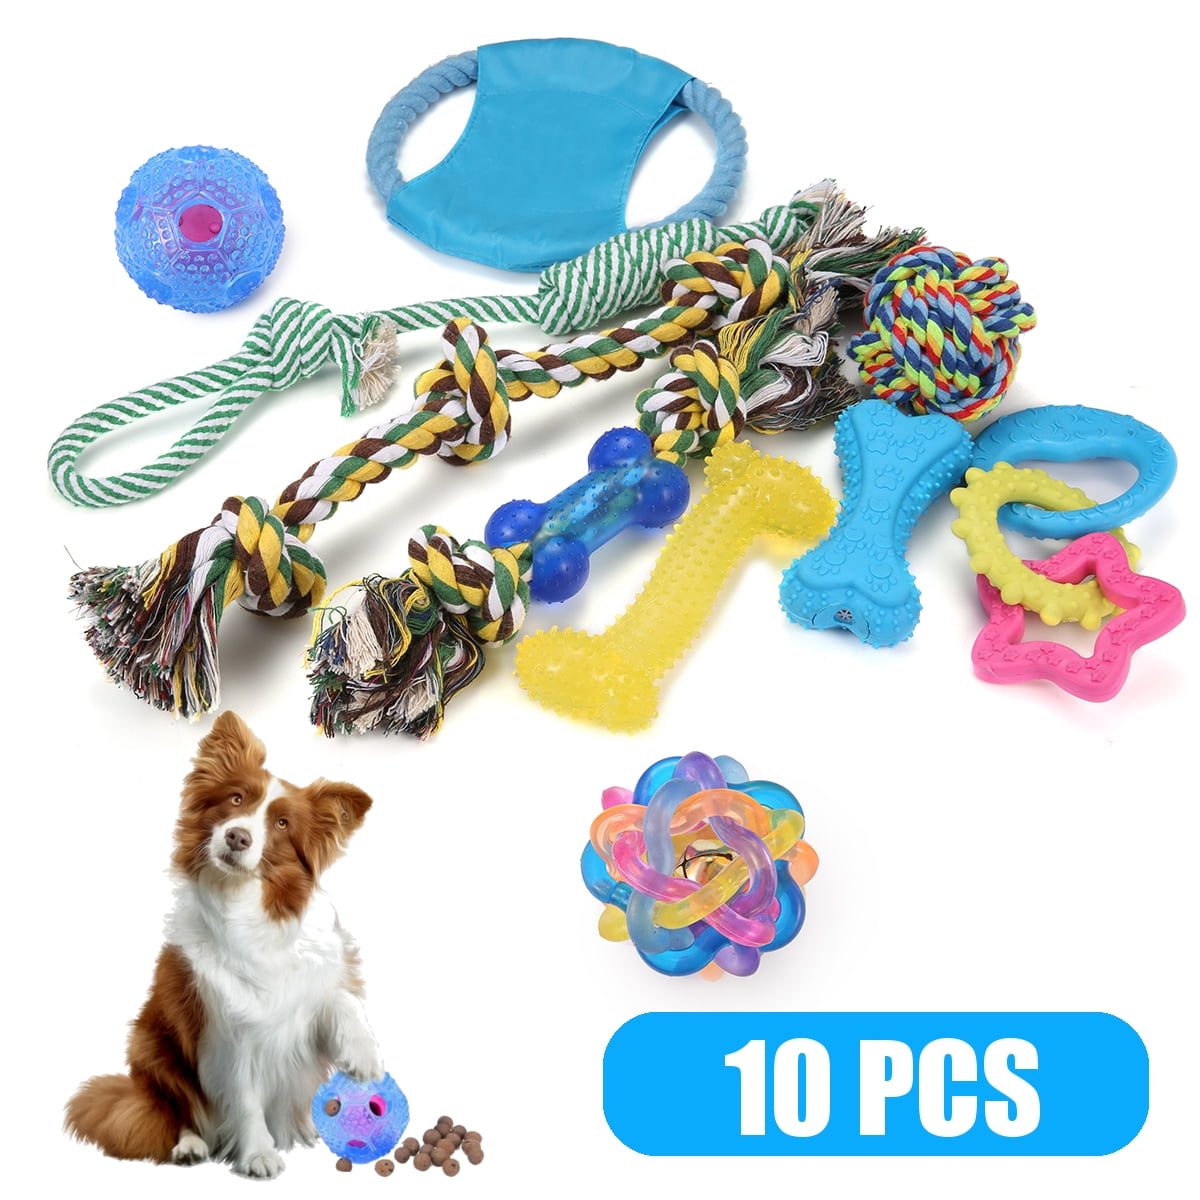 Puppy Braided Cotton Toys,100% Quality Natural Cotton 12Pcs Dog Rope Toys Set Pet Chew Rope Toys for Teething or Training Small and Medium Dogs 